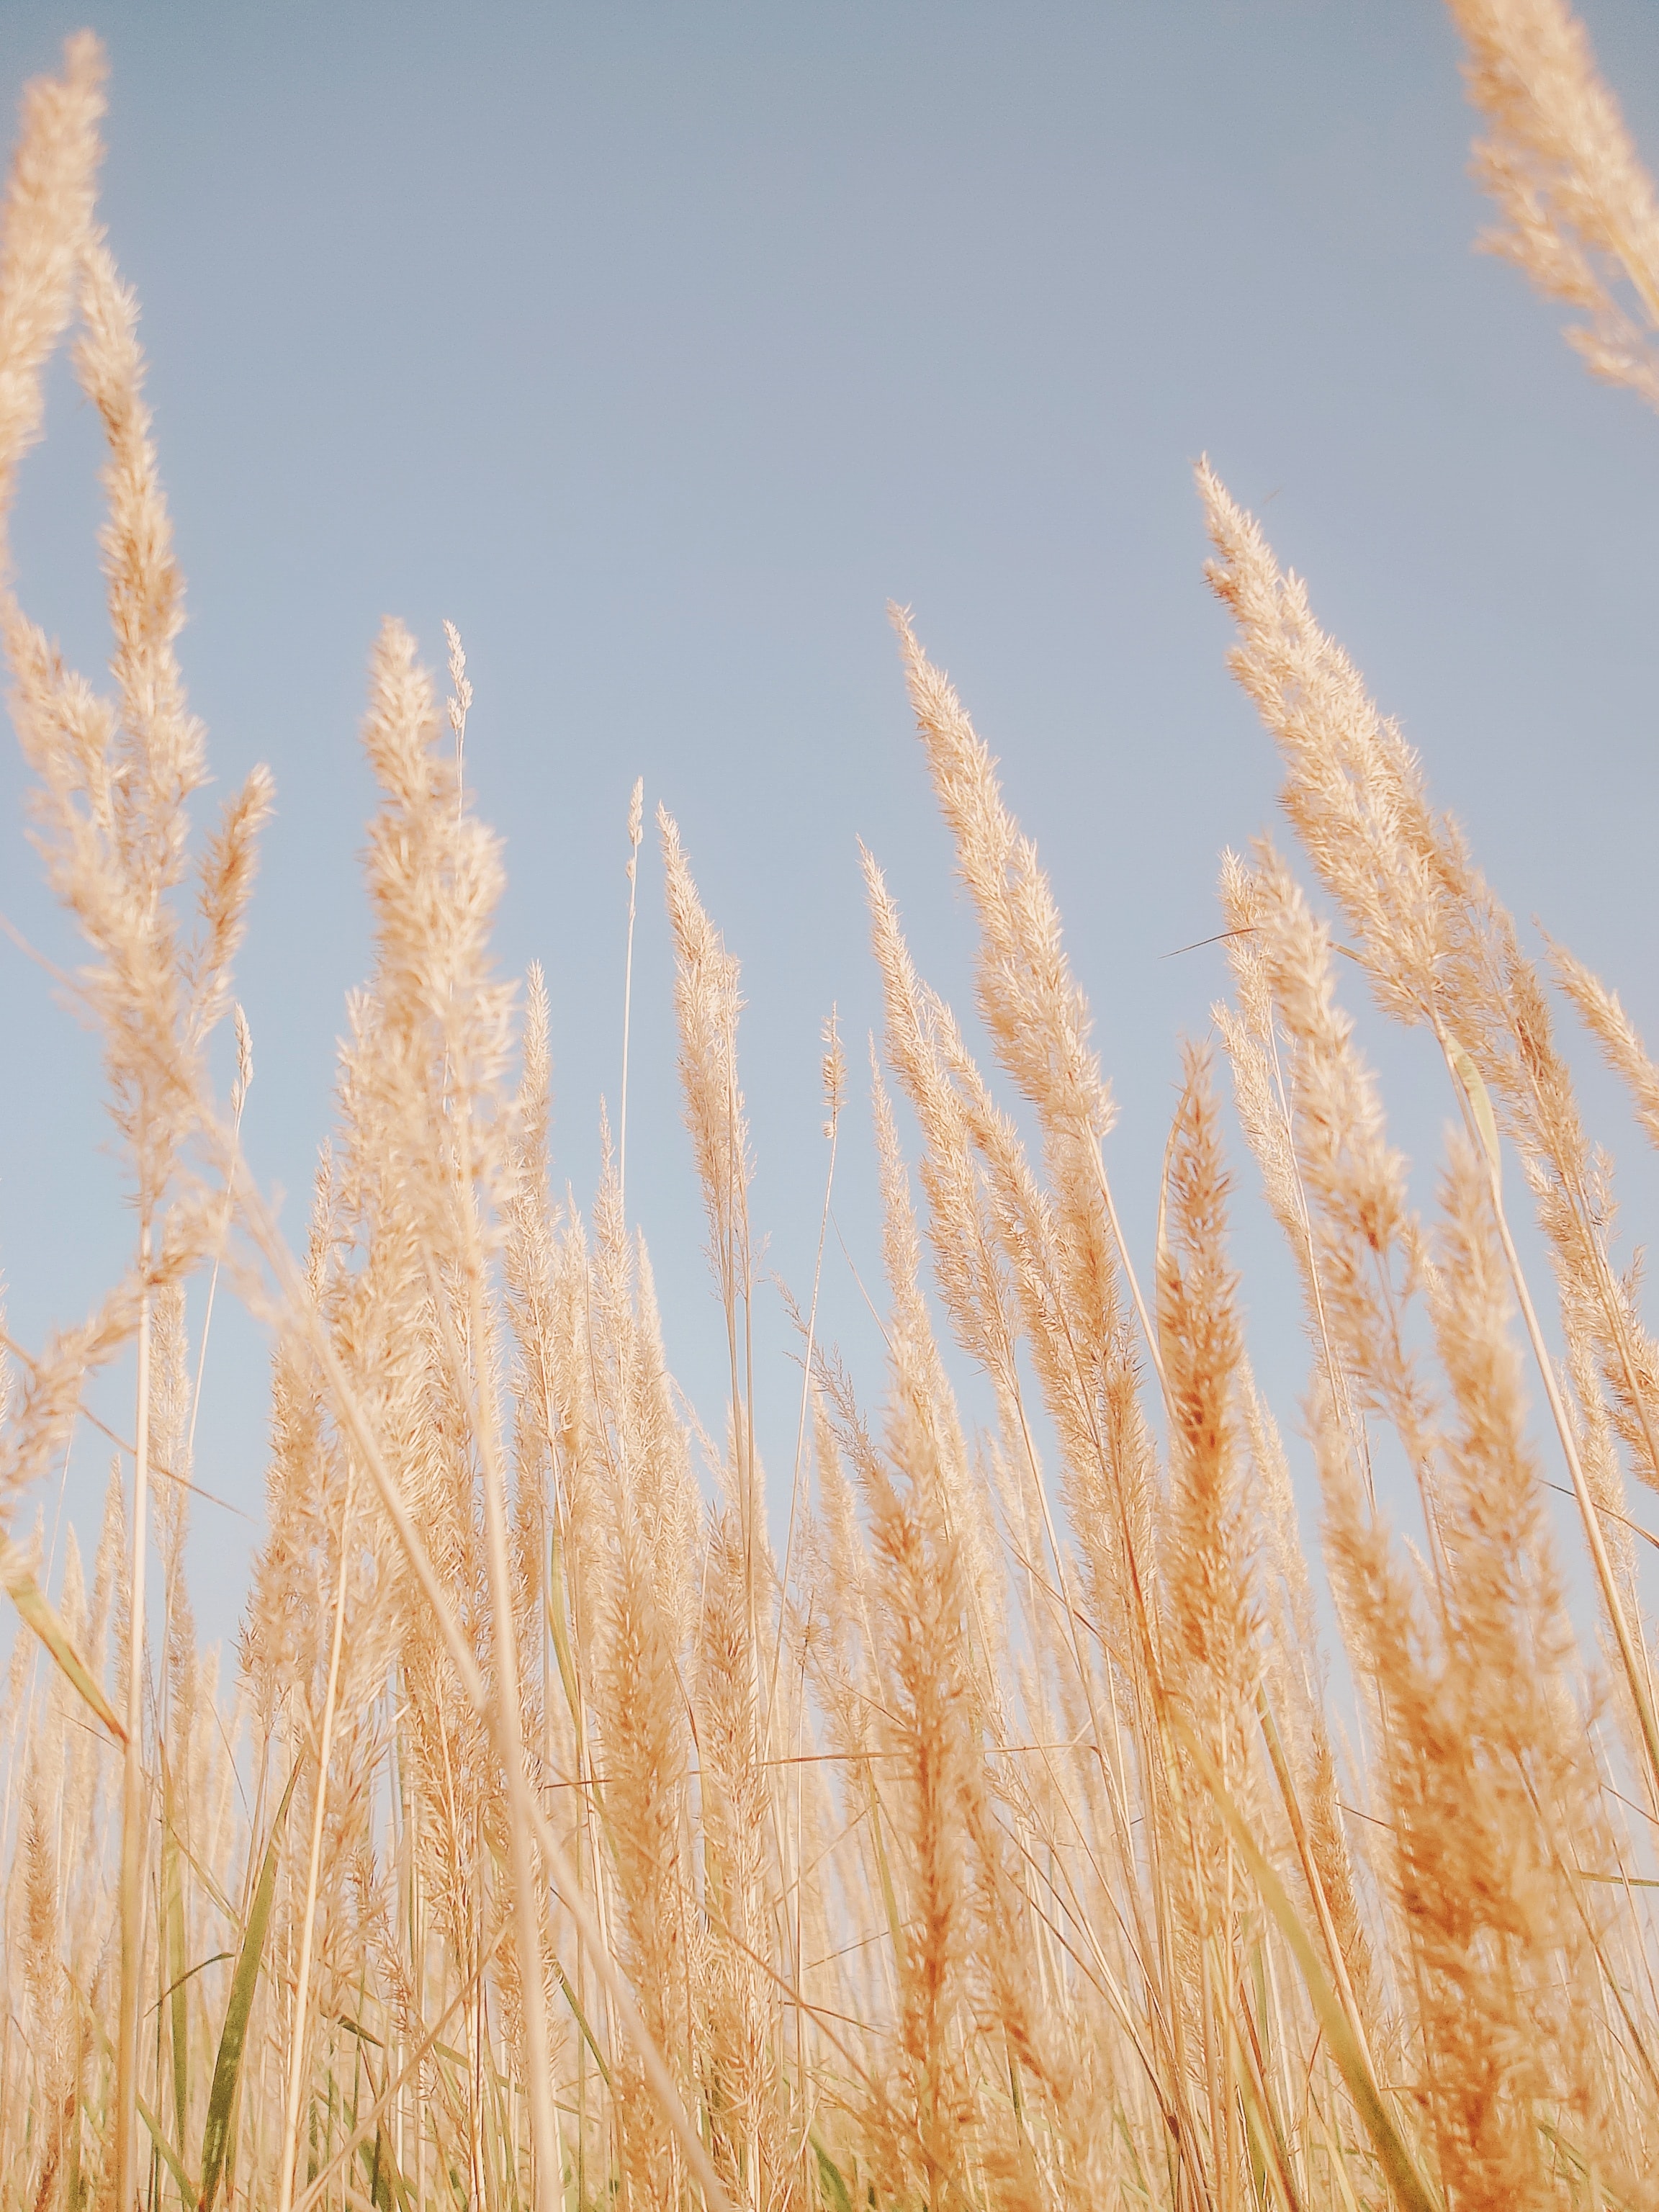 brown, cane, nature, plants, grass, dry, reed